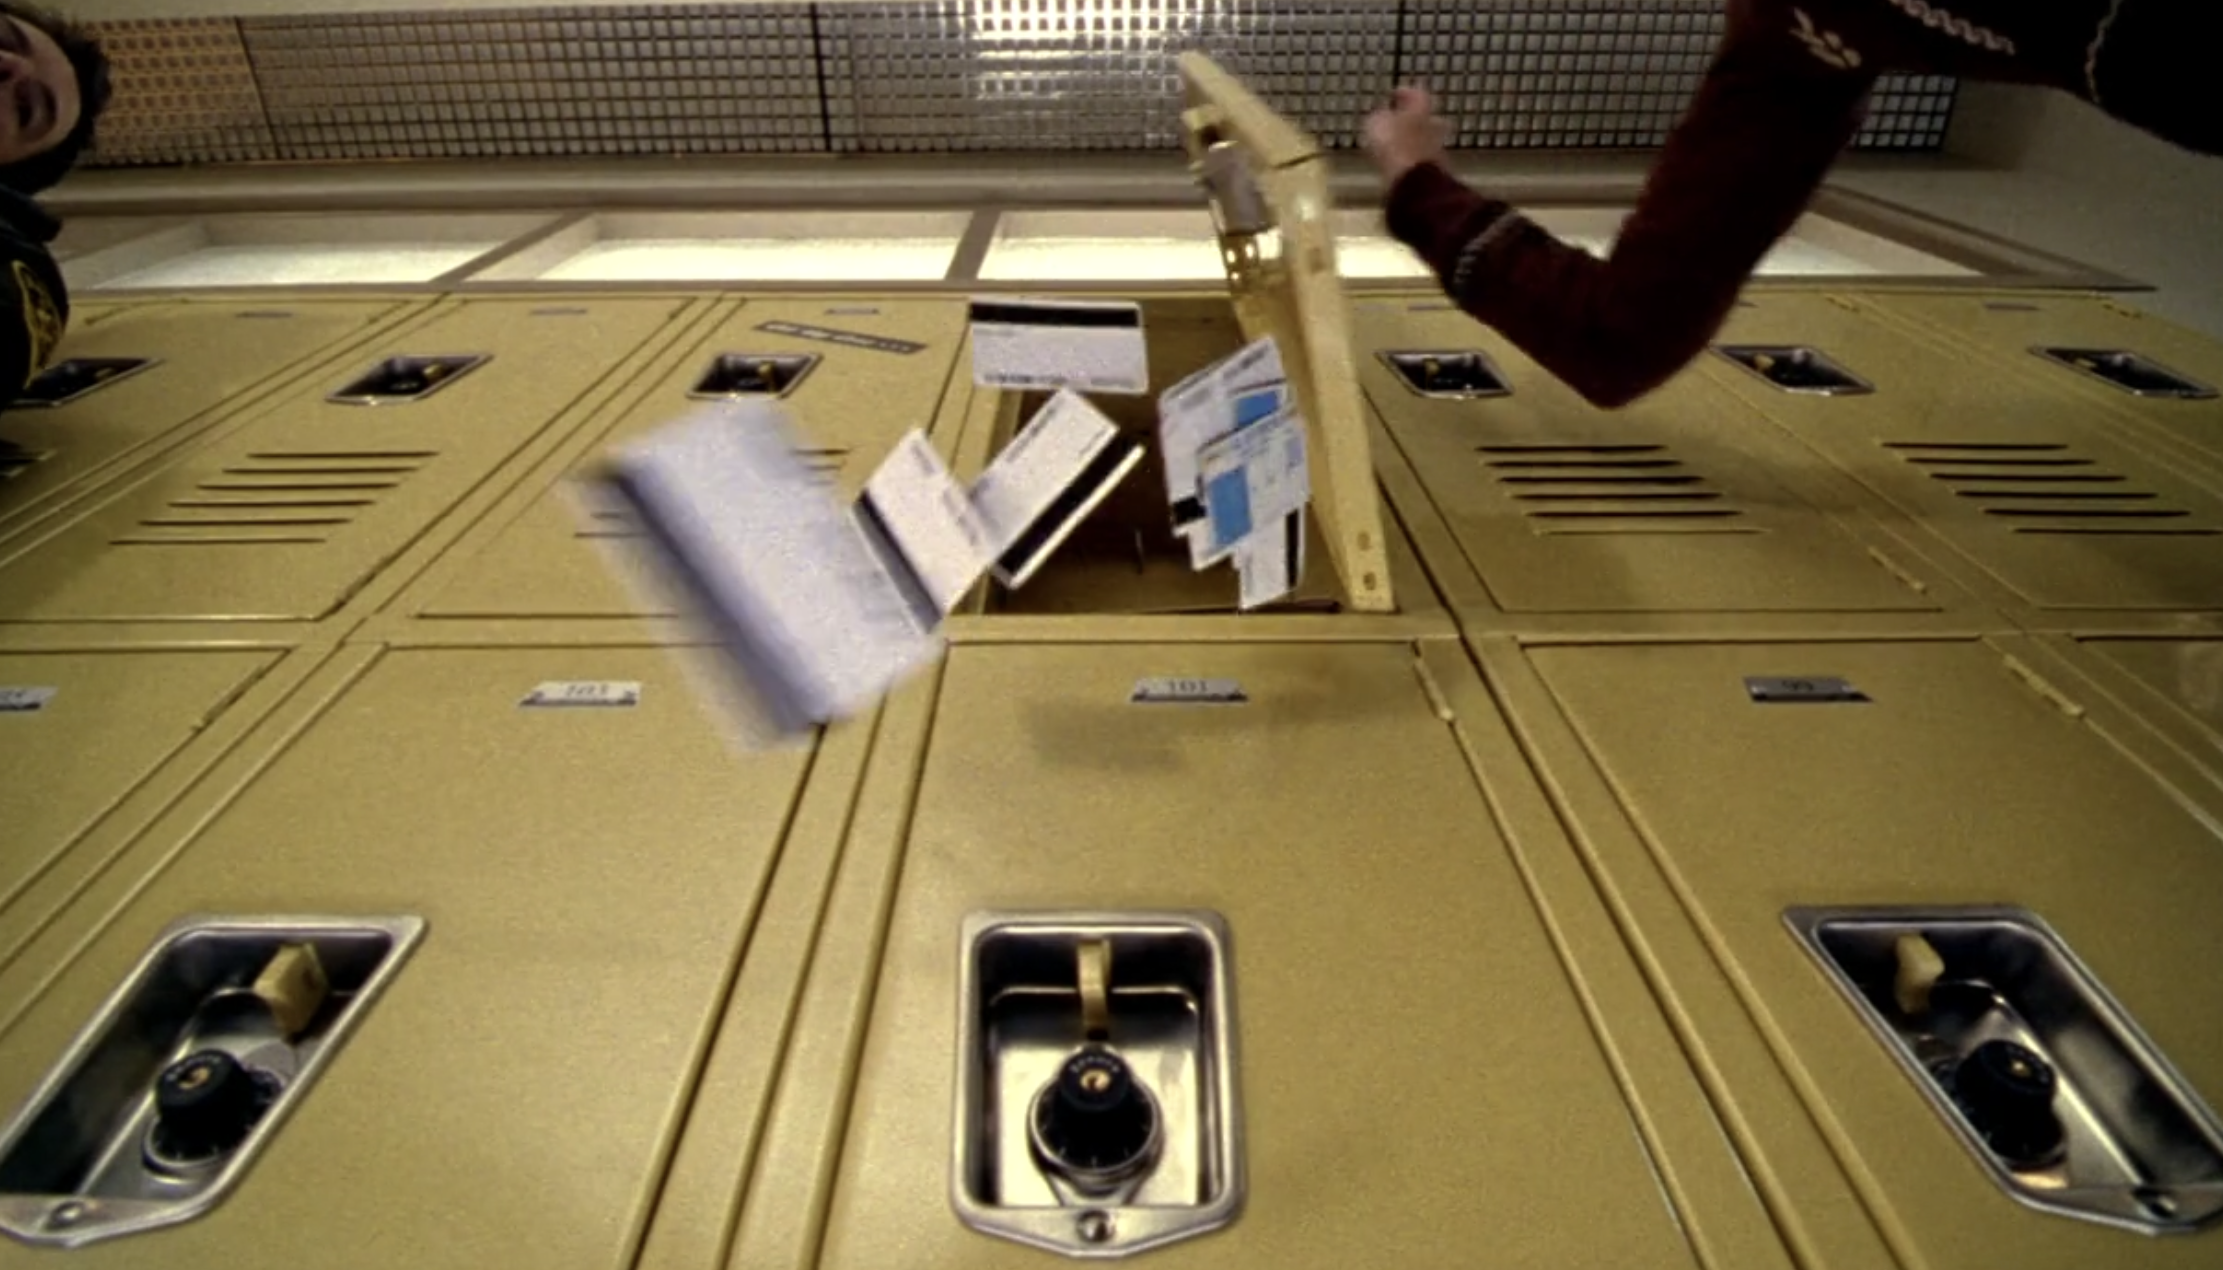 Screenshot from S1E12 of Veronica Mars. It's a shot of a bank of yellow lockers from below looking up. A bunch of fake IDs are tumbling out of an open locker on the top row.